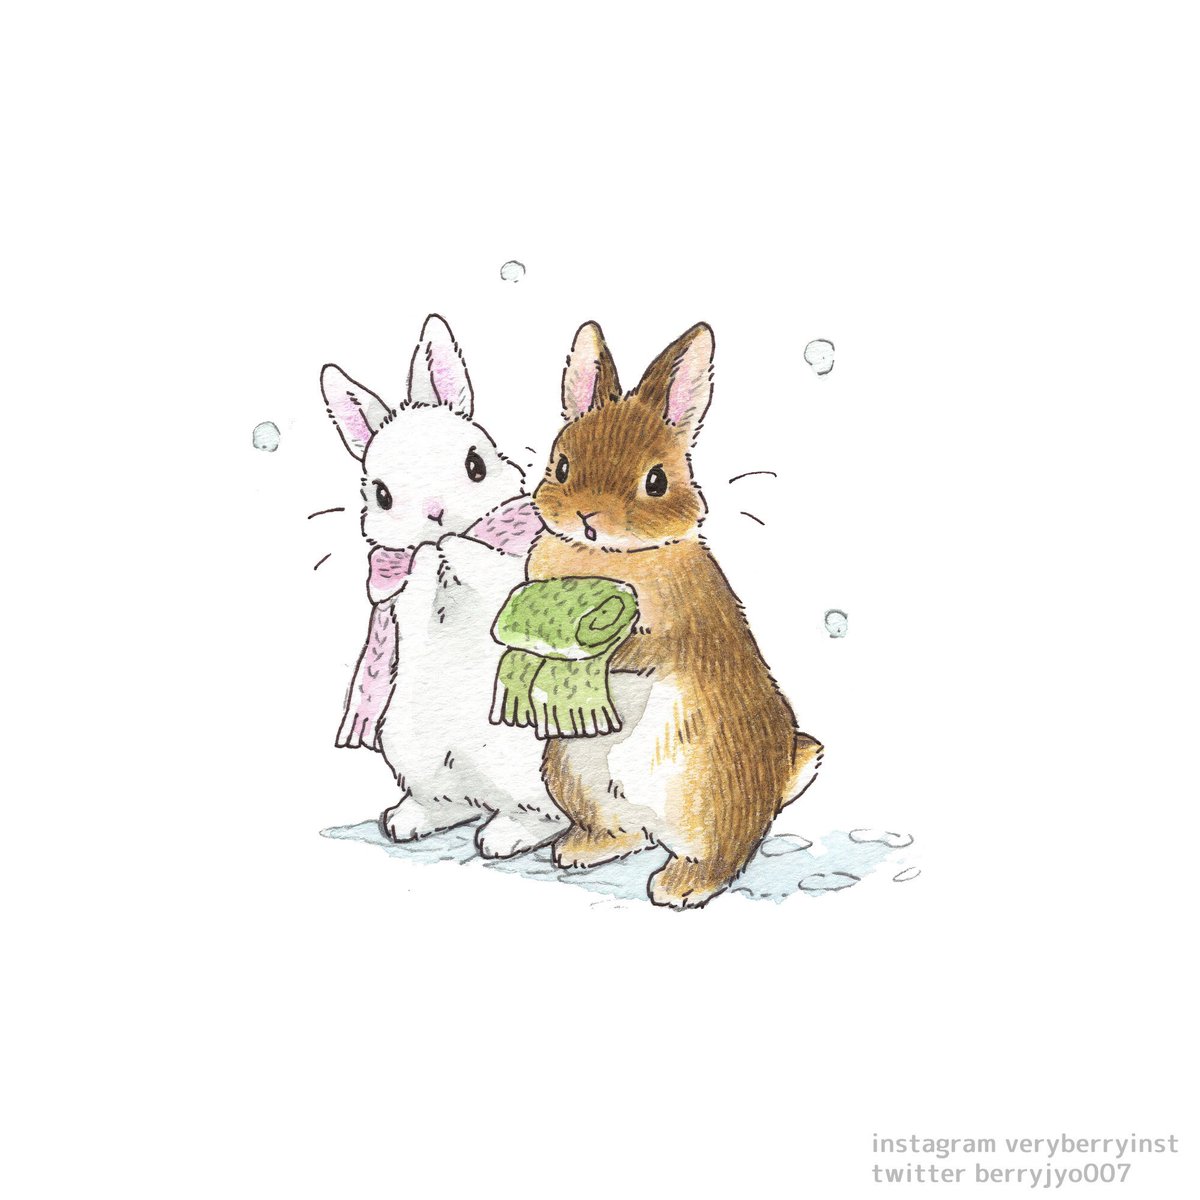 pink scarf rabbit scarf no humans animal focus green scarf white background  illustration images